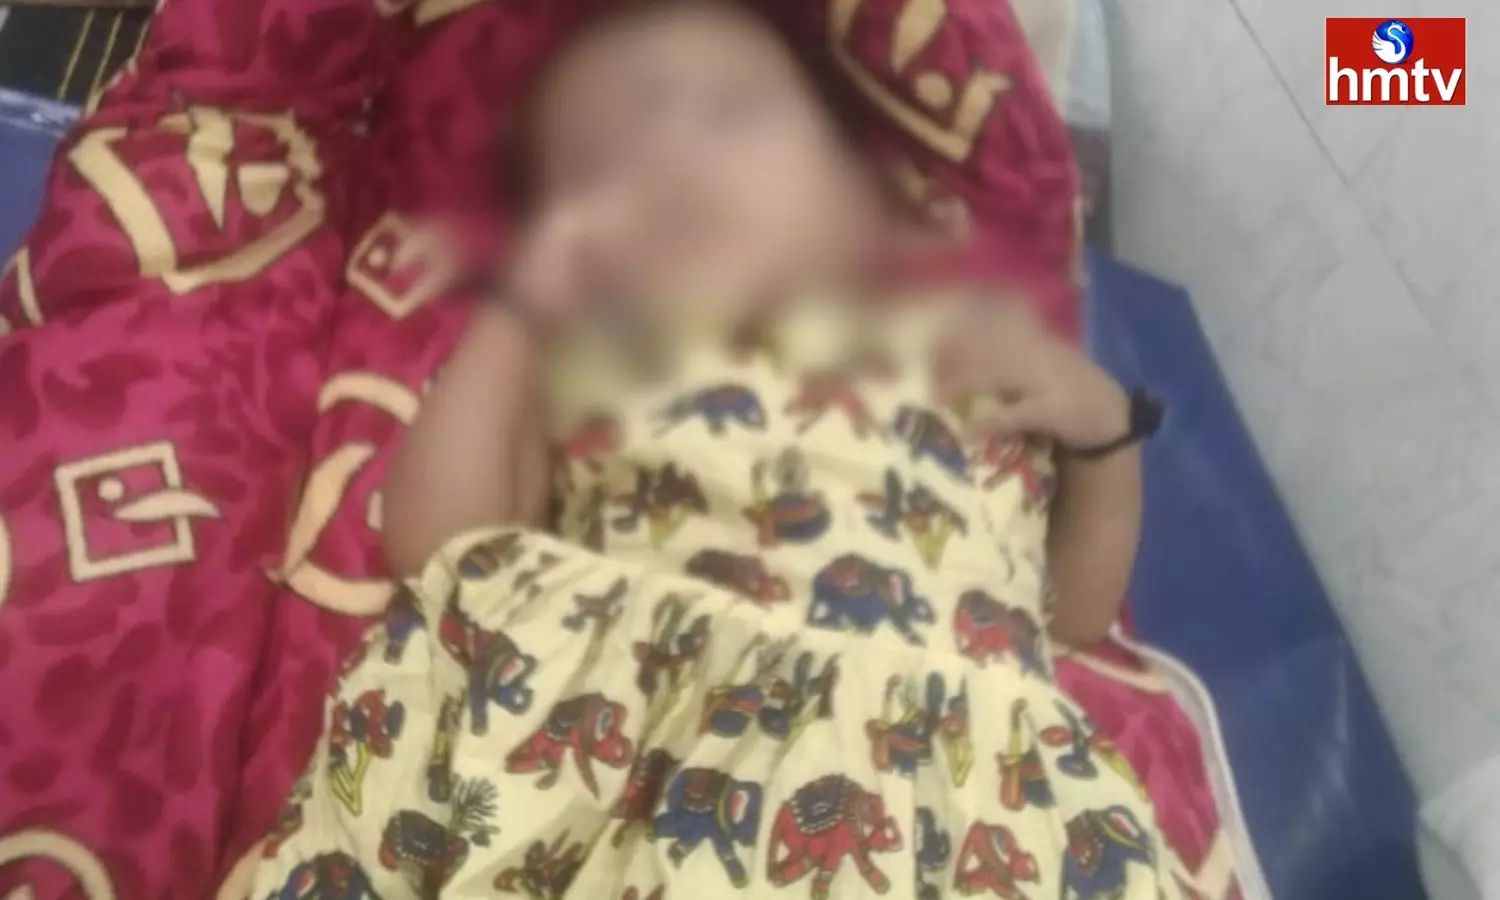 A 3-month-old baby was found on the road in Uppal, Hyderabad